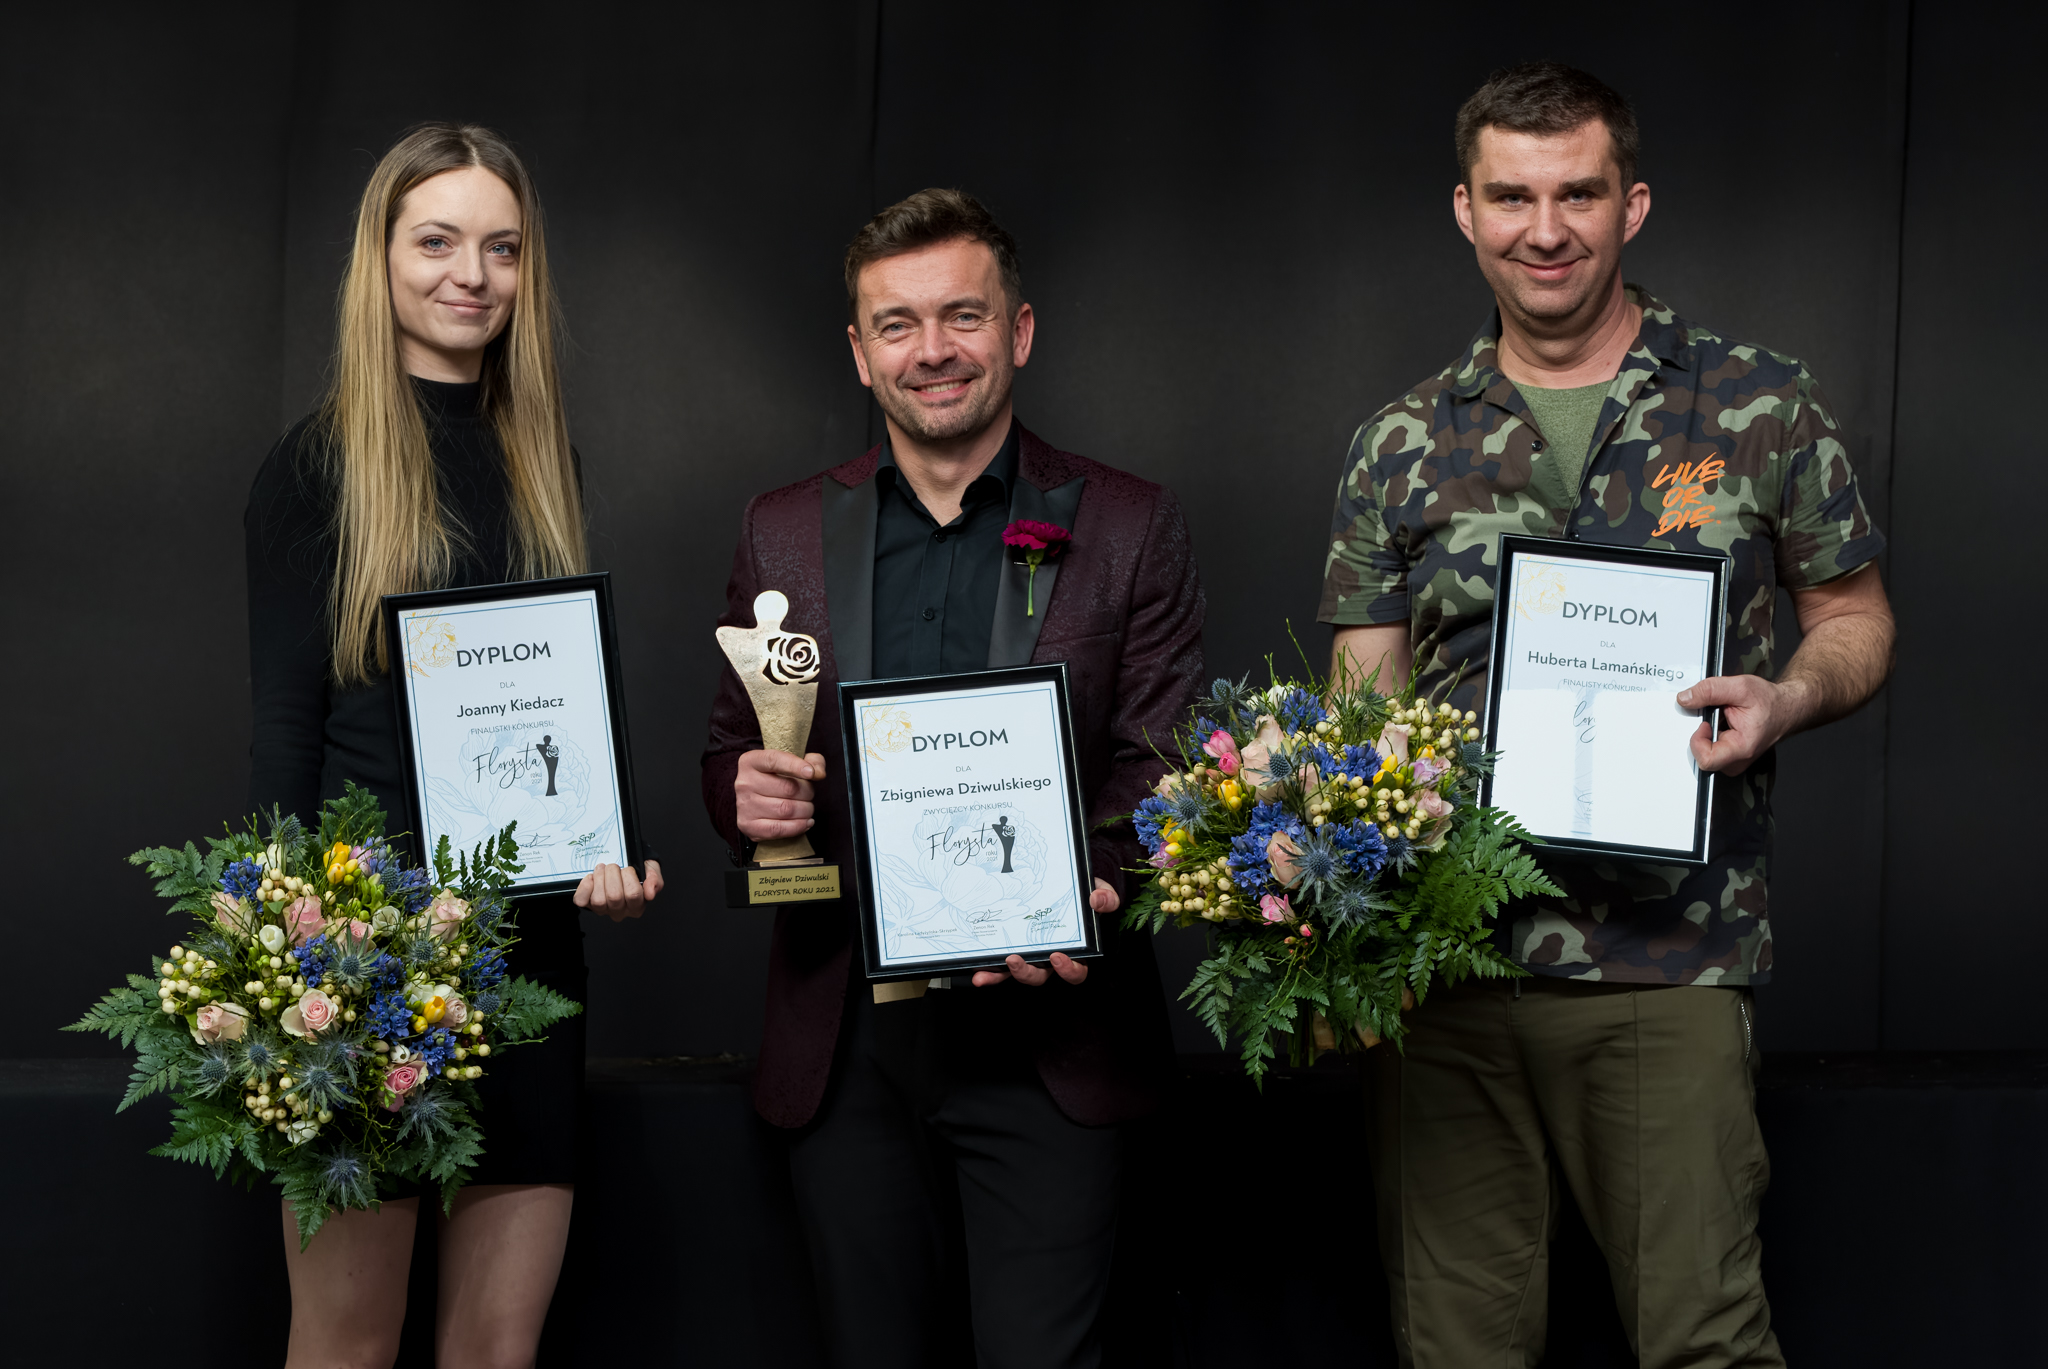 Final 3 with Winner Zbigniew Dziwulski as Florist of the Year 2021 in Poland on Thursd